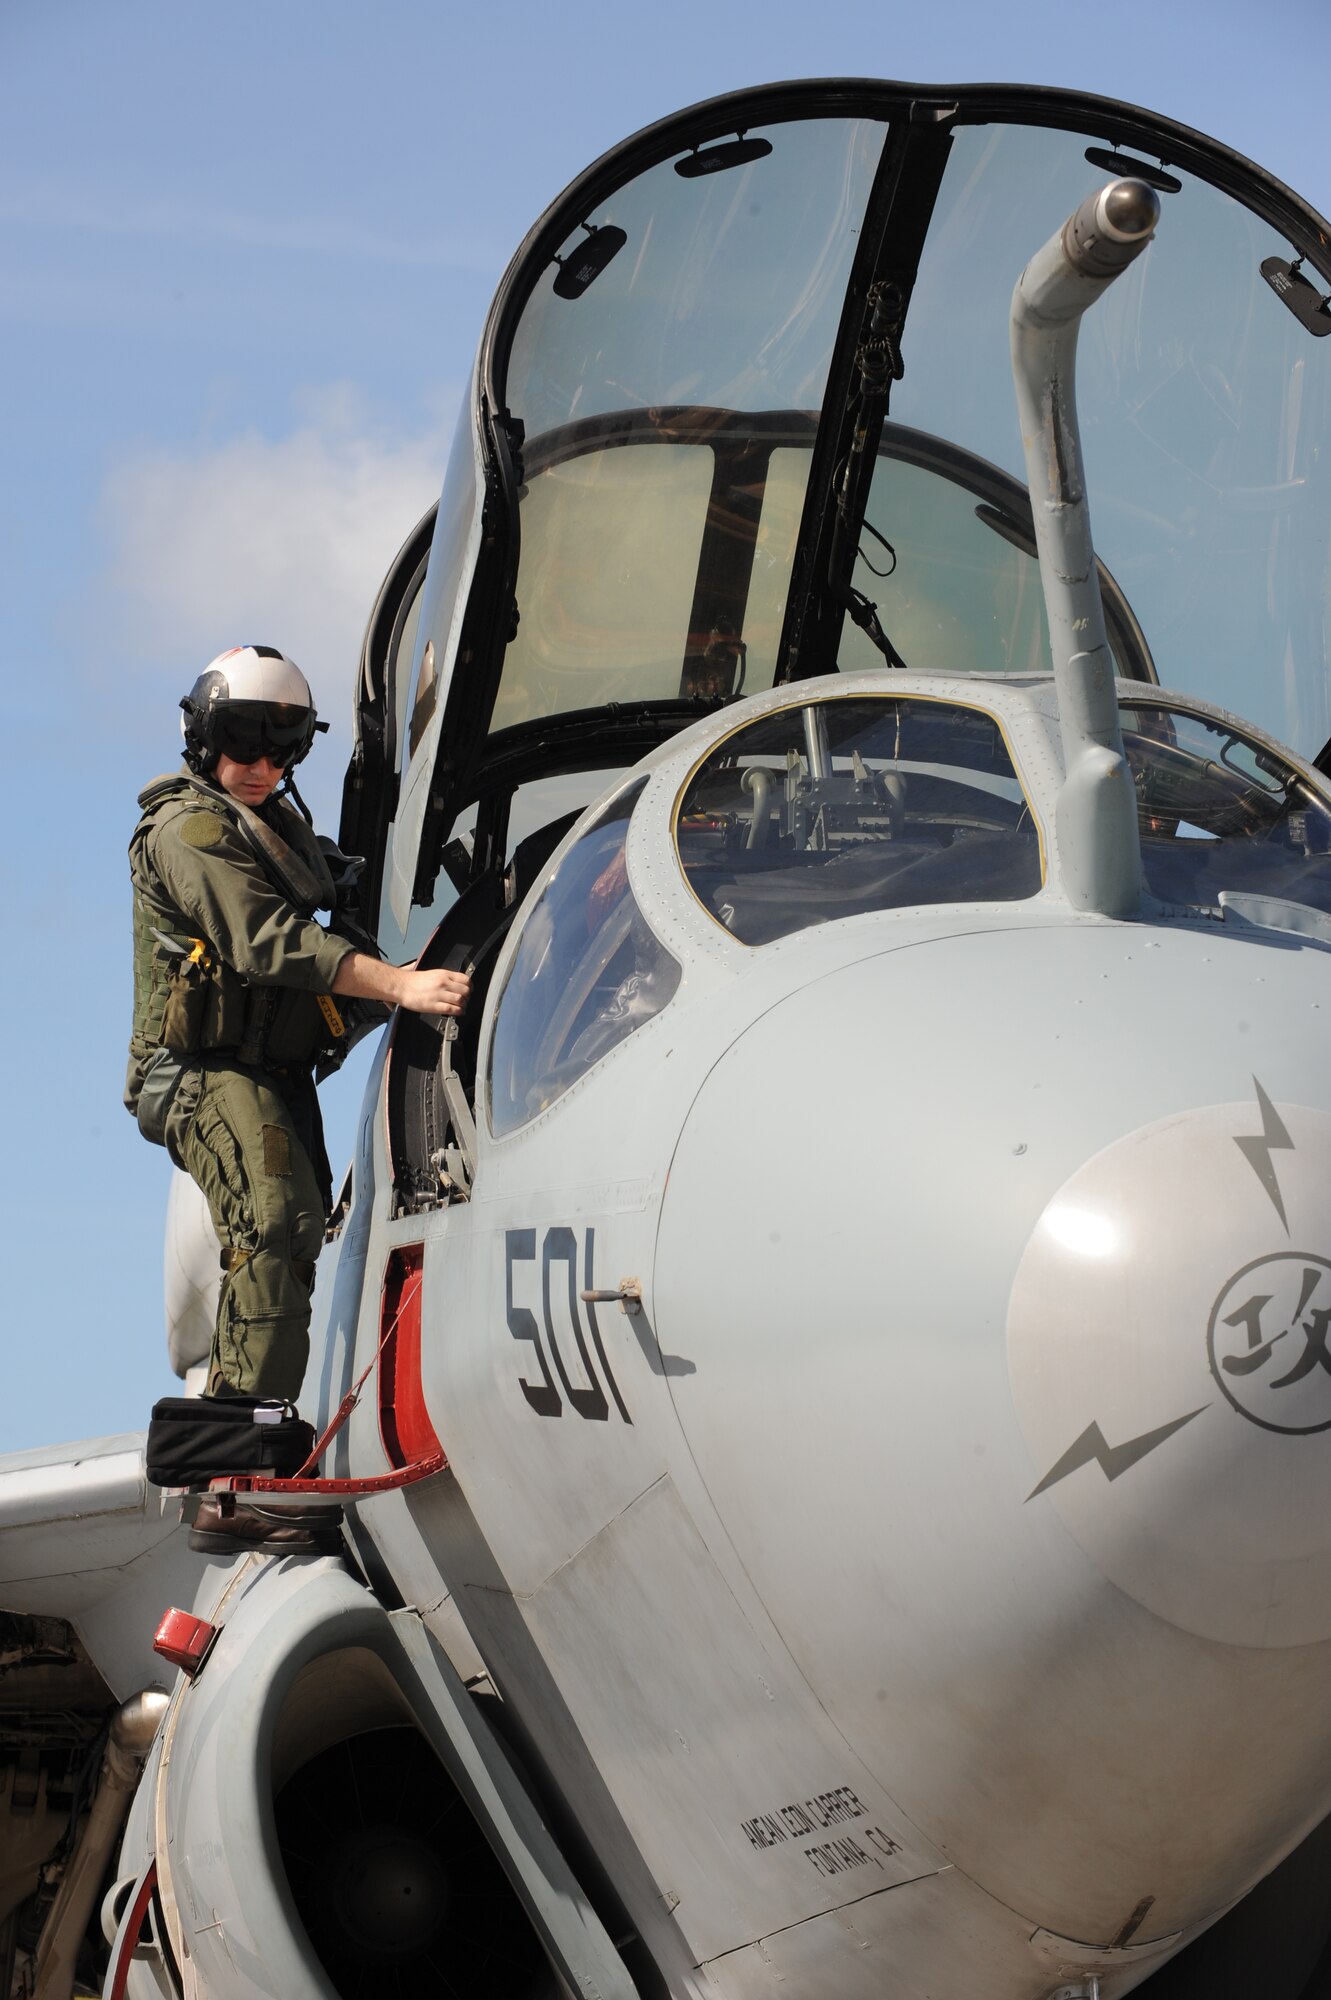 U.S. Navy Lt. j.g. Richard Rosenbush, electronic counter measures operator makes a final look over of an EA-6B Prowler, Feb. 3 at Andersen Air Force Base, Guam prior to a local area mission during exercise Cope North 09-1. Navy EA-6B Prowlers from VAQ-136 Carrier Air Wing Five, Atsugi, Japan along with Japan Air Self Defense Force F-2s  from the 6th Squadron, Tsuiki Air Base and E-2Cs from the 601st Squadron, Misawa Air Base will join forward deployed USAF  F-16 Fighting Falcons from the 18th Aggressor Squadron, Eielson Air Force Base, Alaska, B-52 Stratofortress' currently deployed to Andersen AFB, Guam from the 23rd Expeditionary Bomb Squadron will participate in this year's Cope North exercise Feb. 2-13, with a focus on interoperability. (U.S. Air Force photo/ Master Sgt. Kevin J. Gruenwald) 